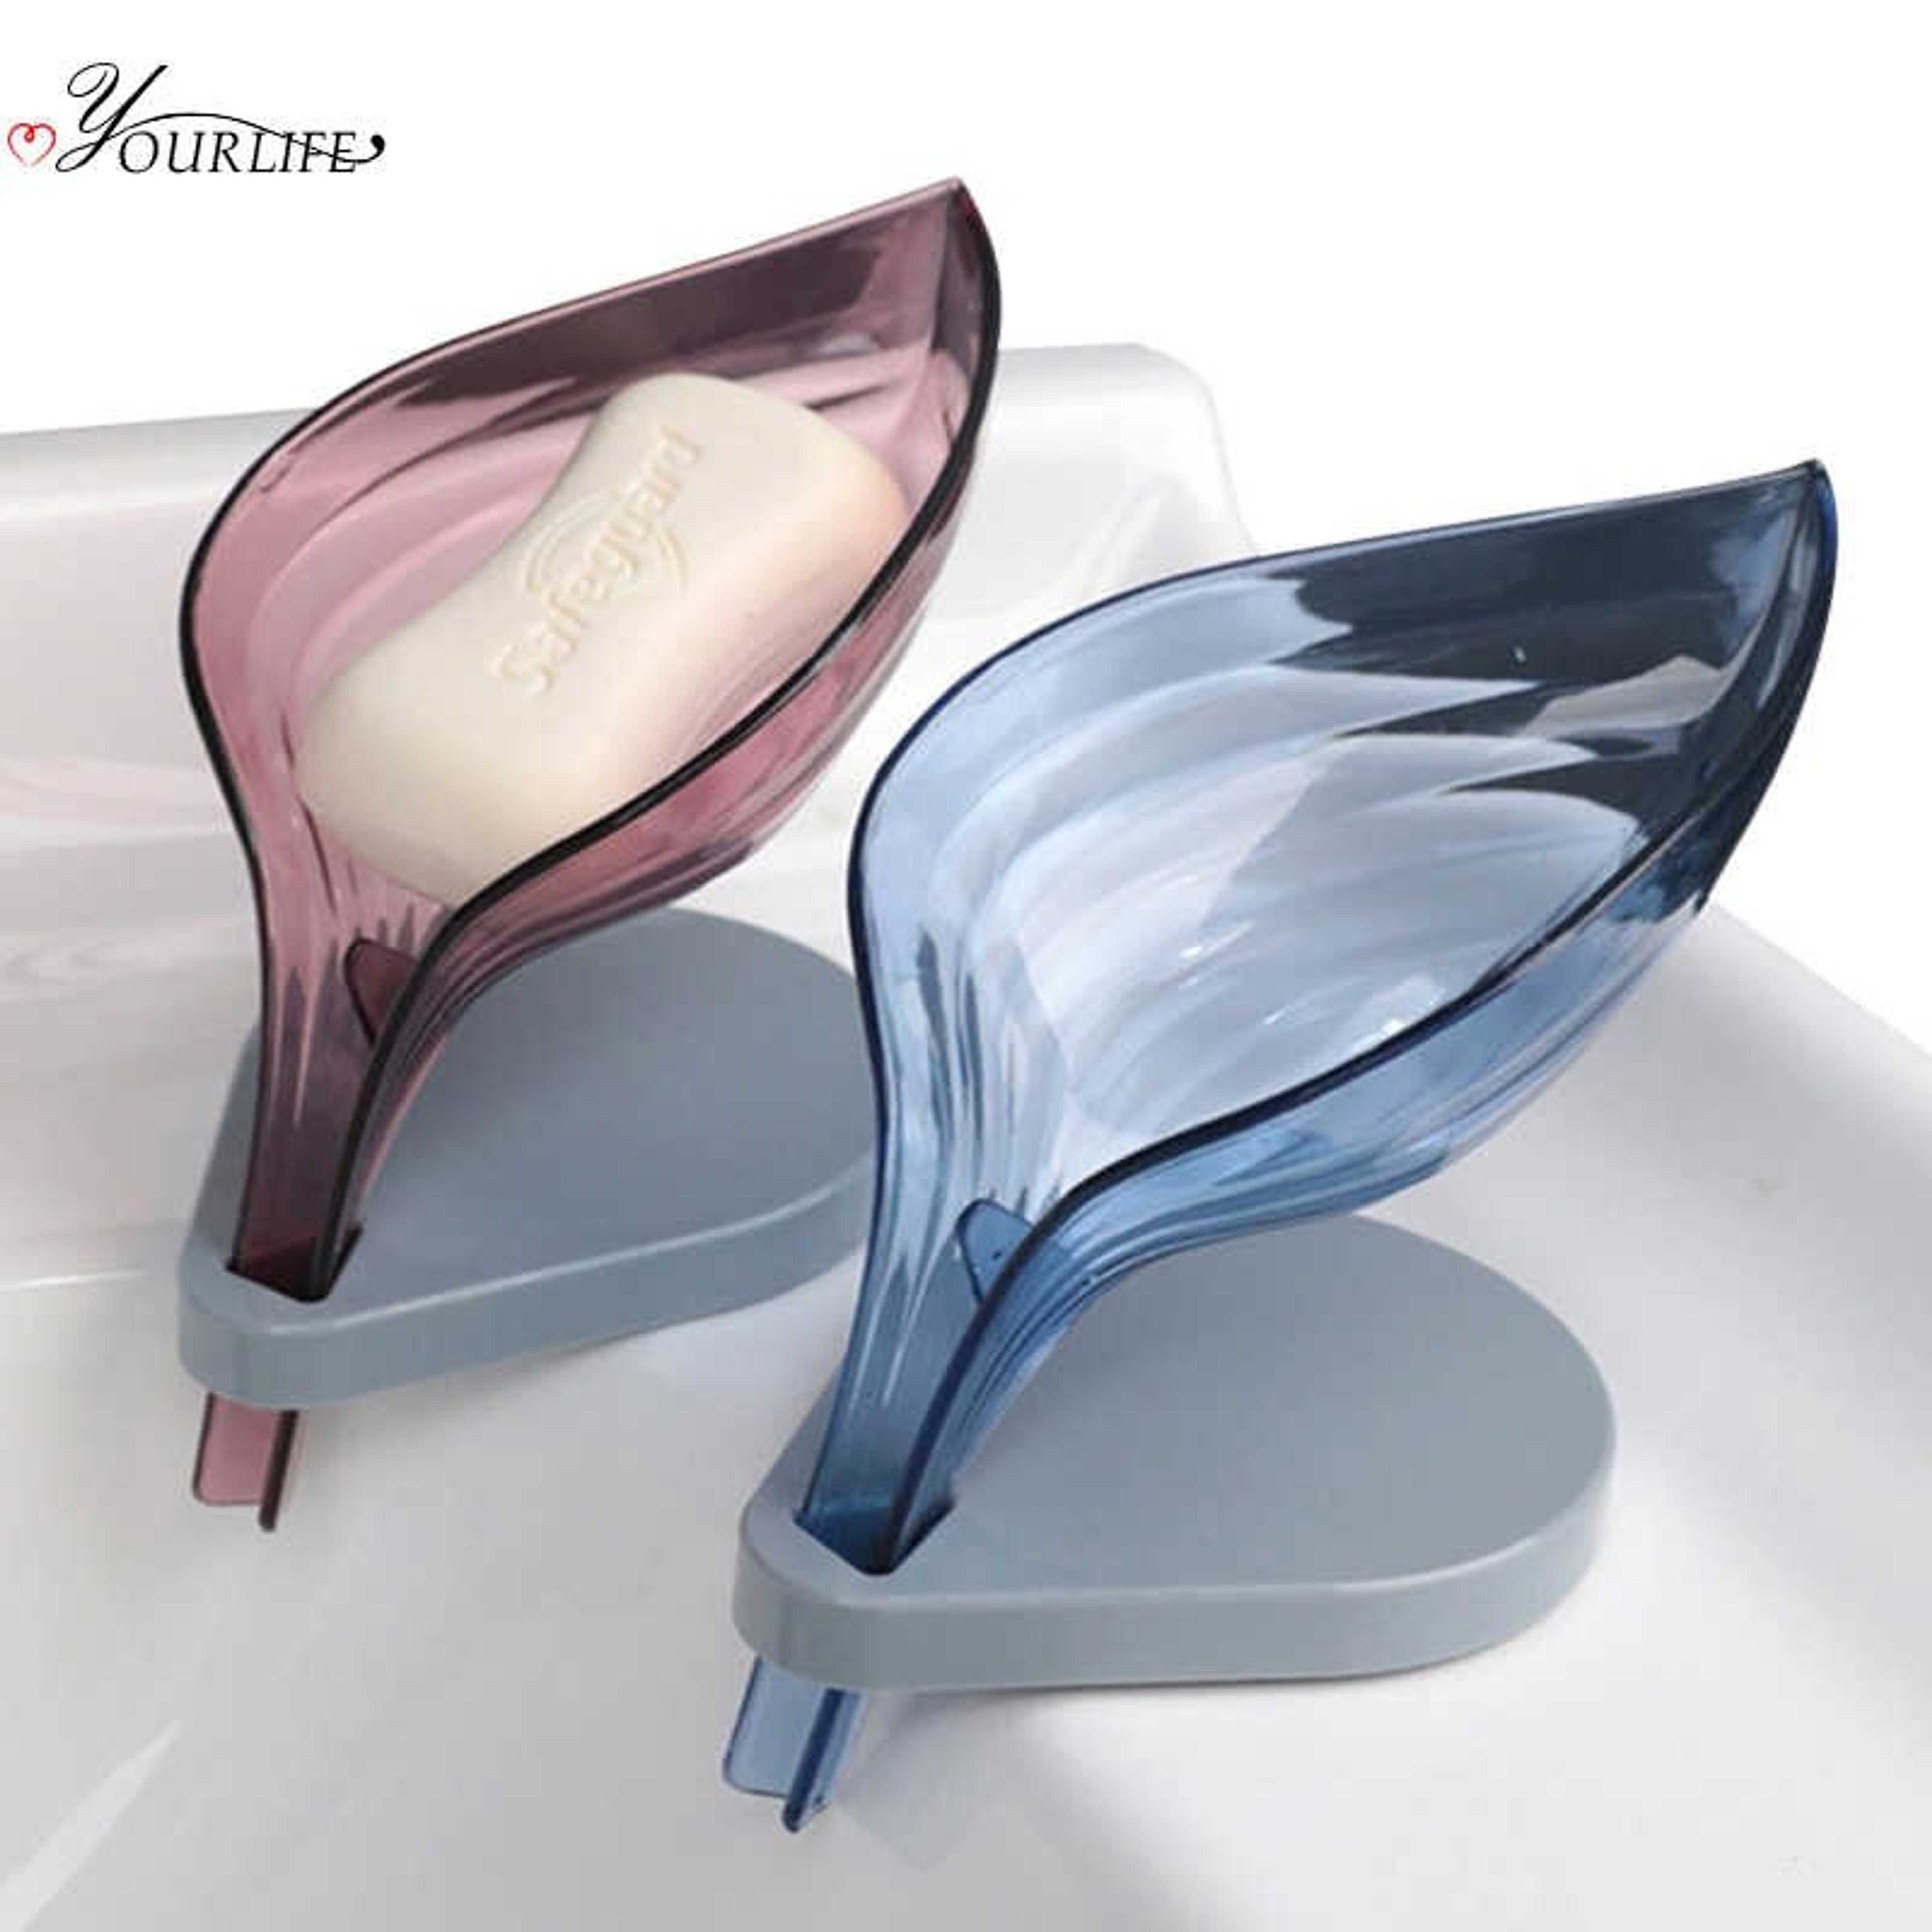 [Pack of 2] Leaf Shaped Soap dish holder, Decorative Drainage Soap Storage Holder, Soap Box for Bathroom and Kitchen, Easy Cleaning Soap Holders